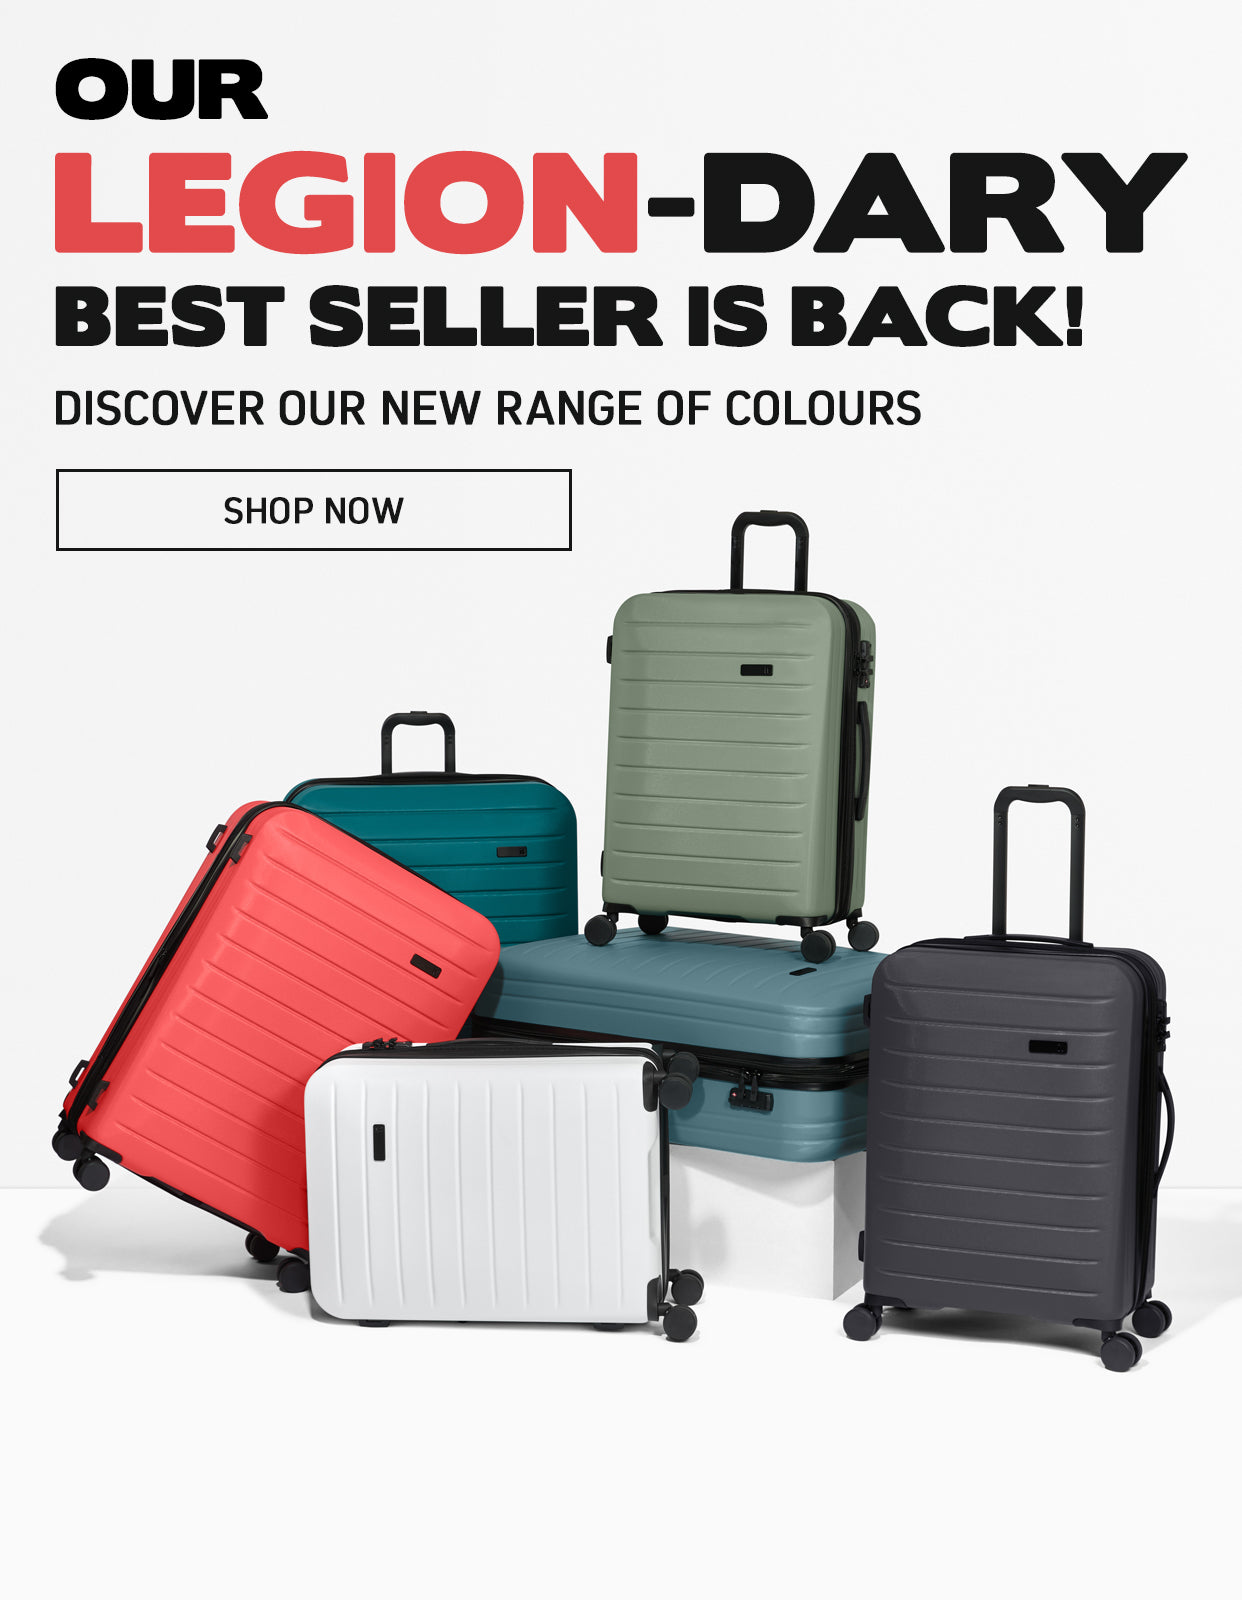 it Luggage | Suitcases, Cabin Bags u0026 Luggage designed in UK